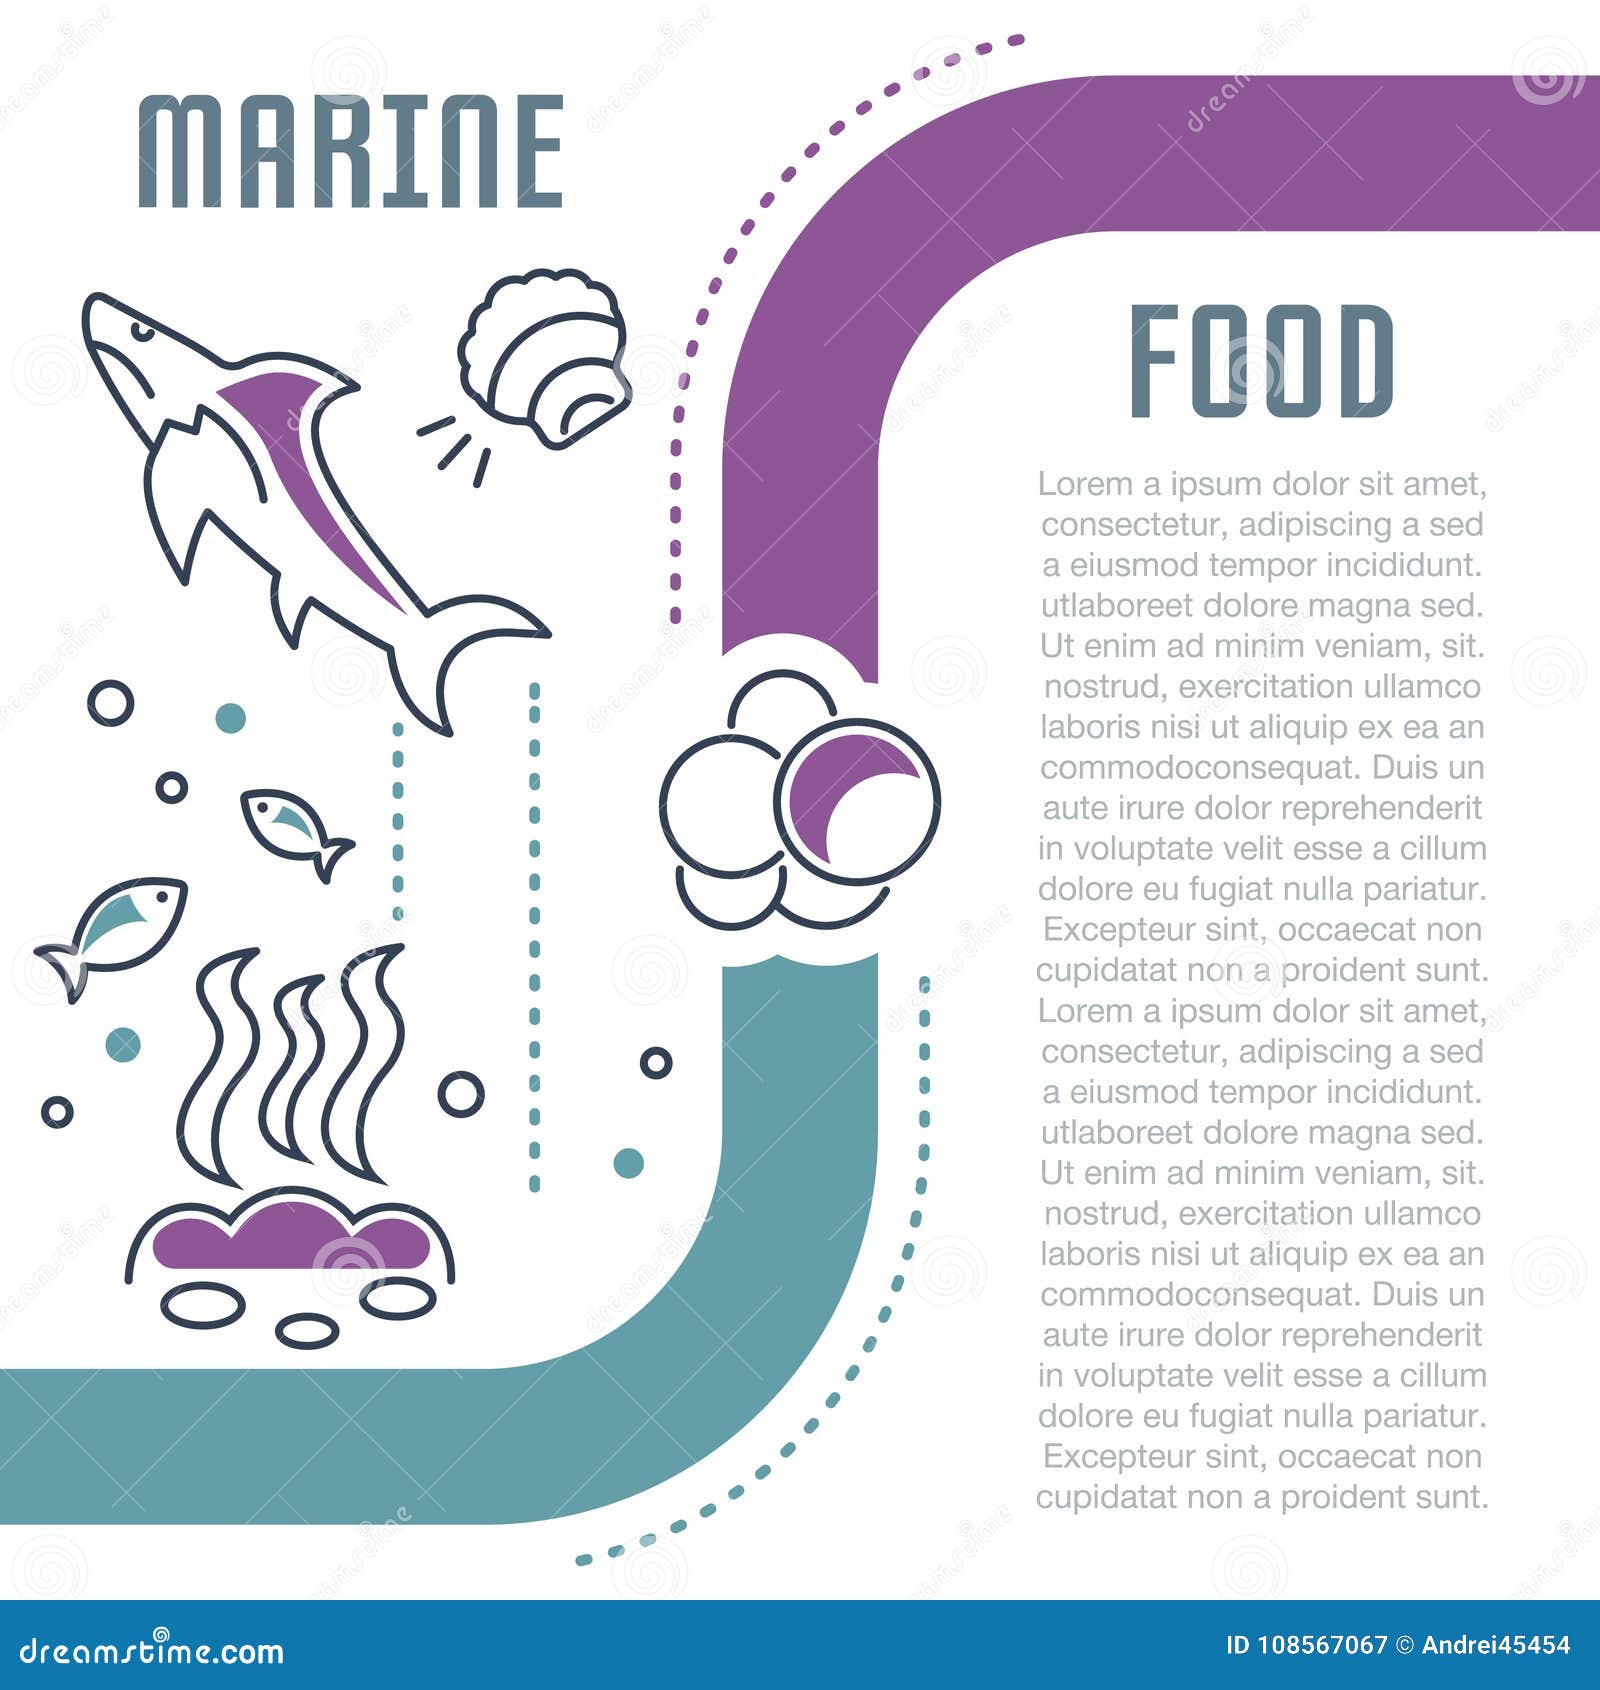 Website Banner and Landing Page of Marine Food. Stock Illustration ...